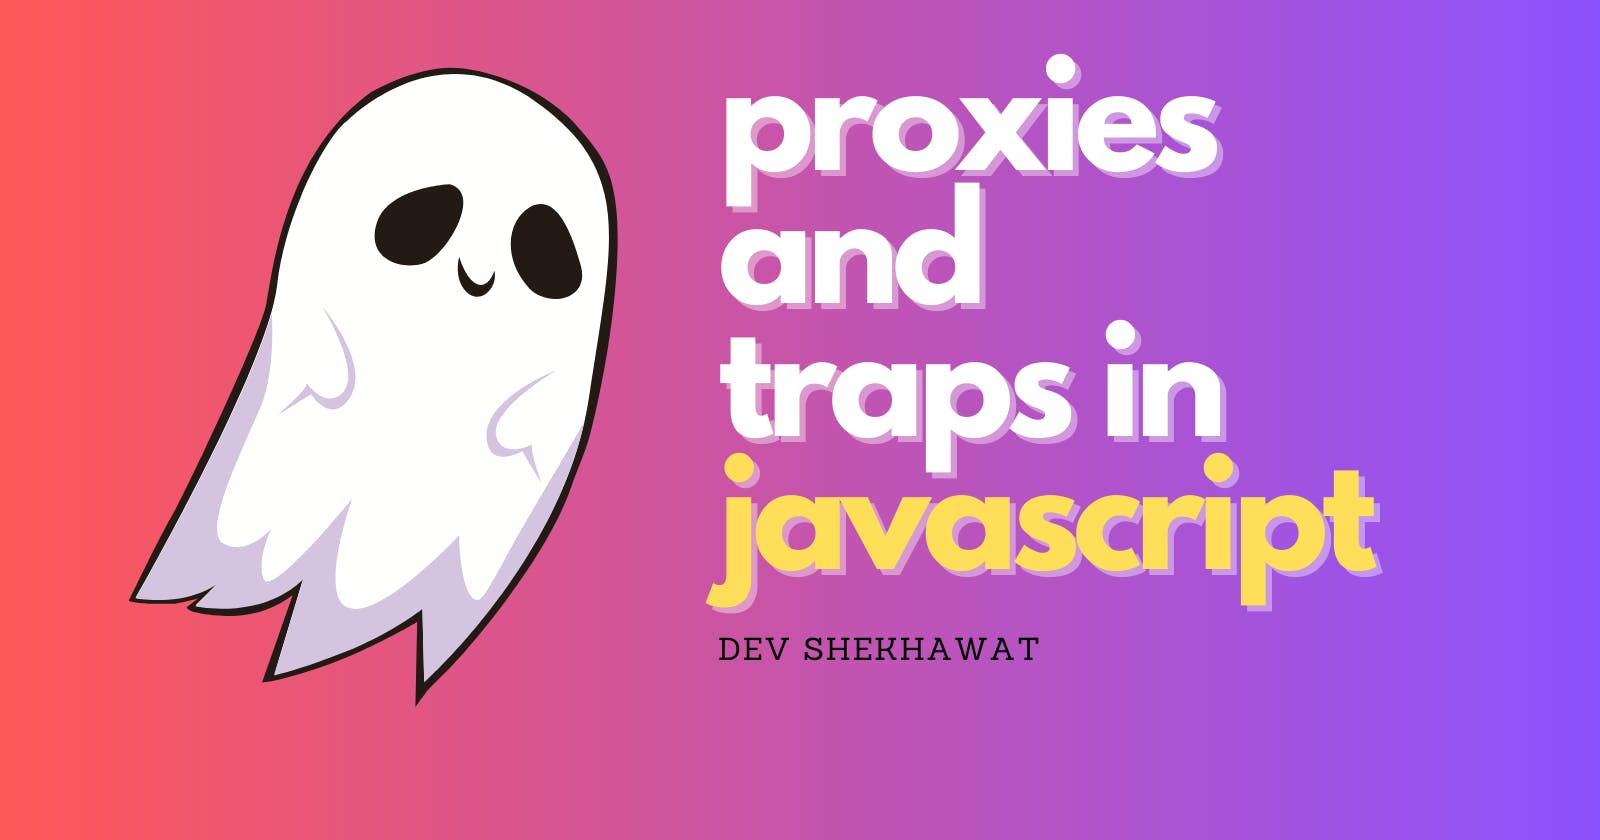 Proxies and traps in Javascript: What & Why